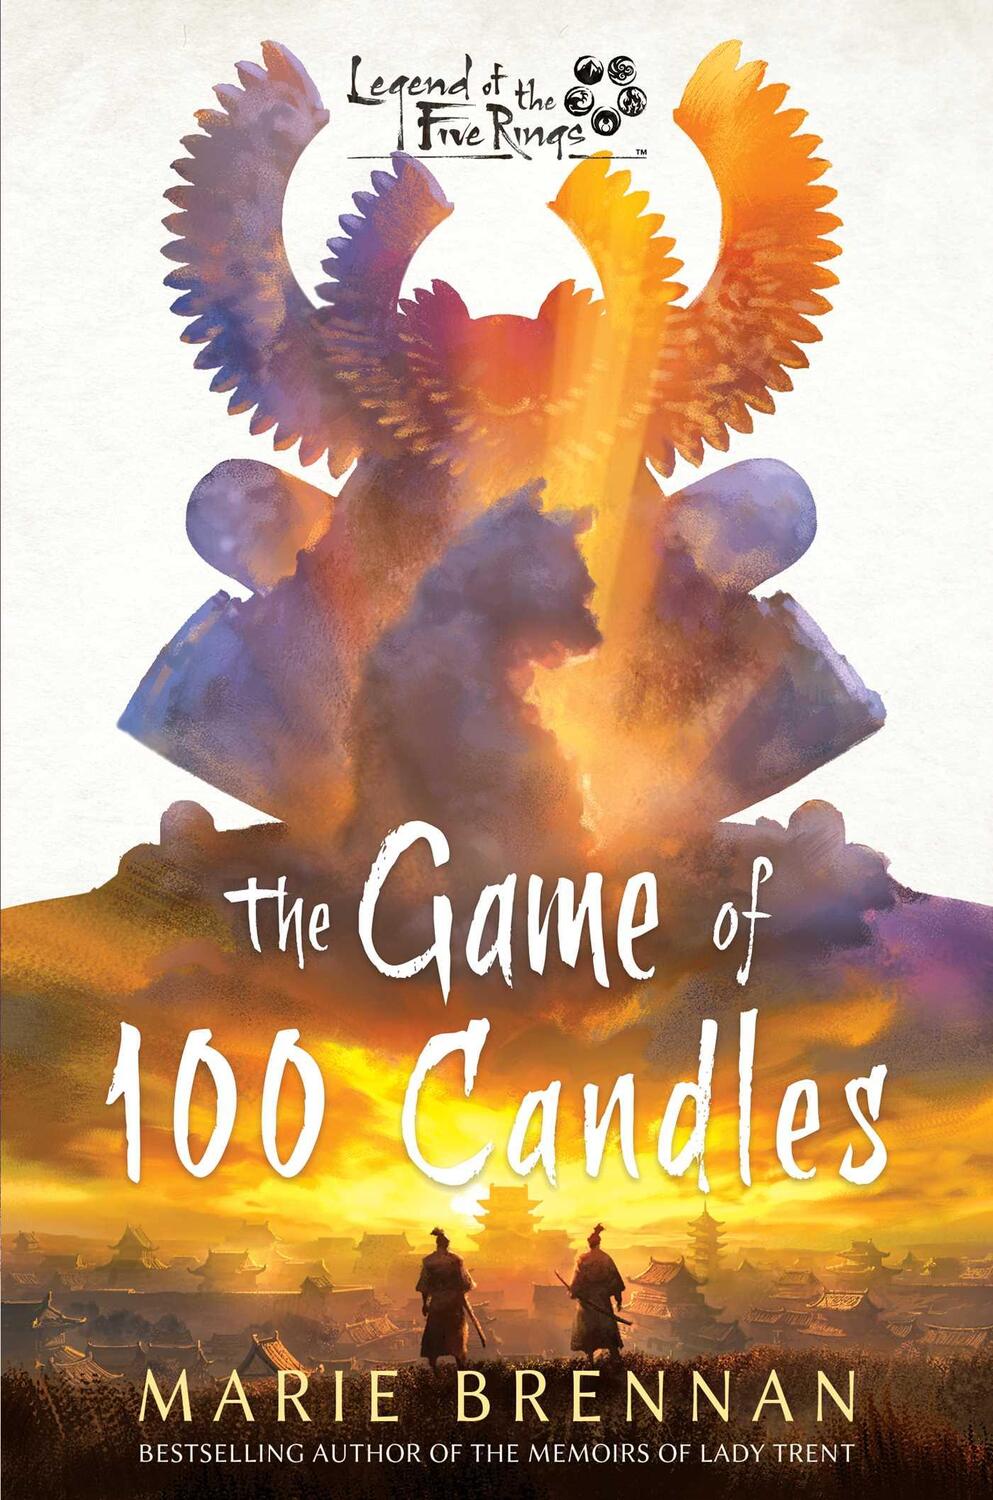 Bild: 9781839082153 | The Game of 100 Candles | A Legend of the Five Rings Novel | Brennan